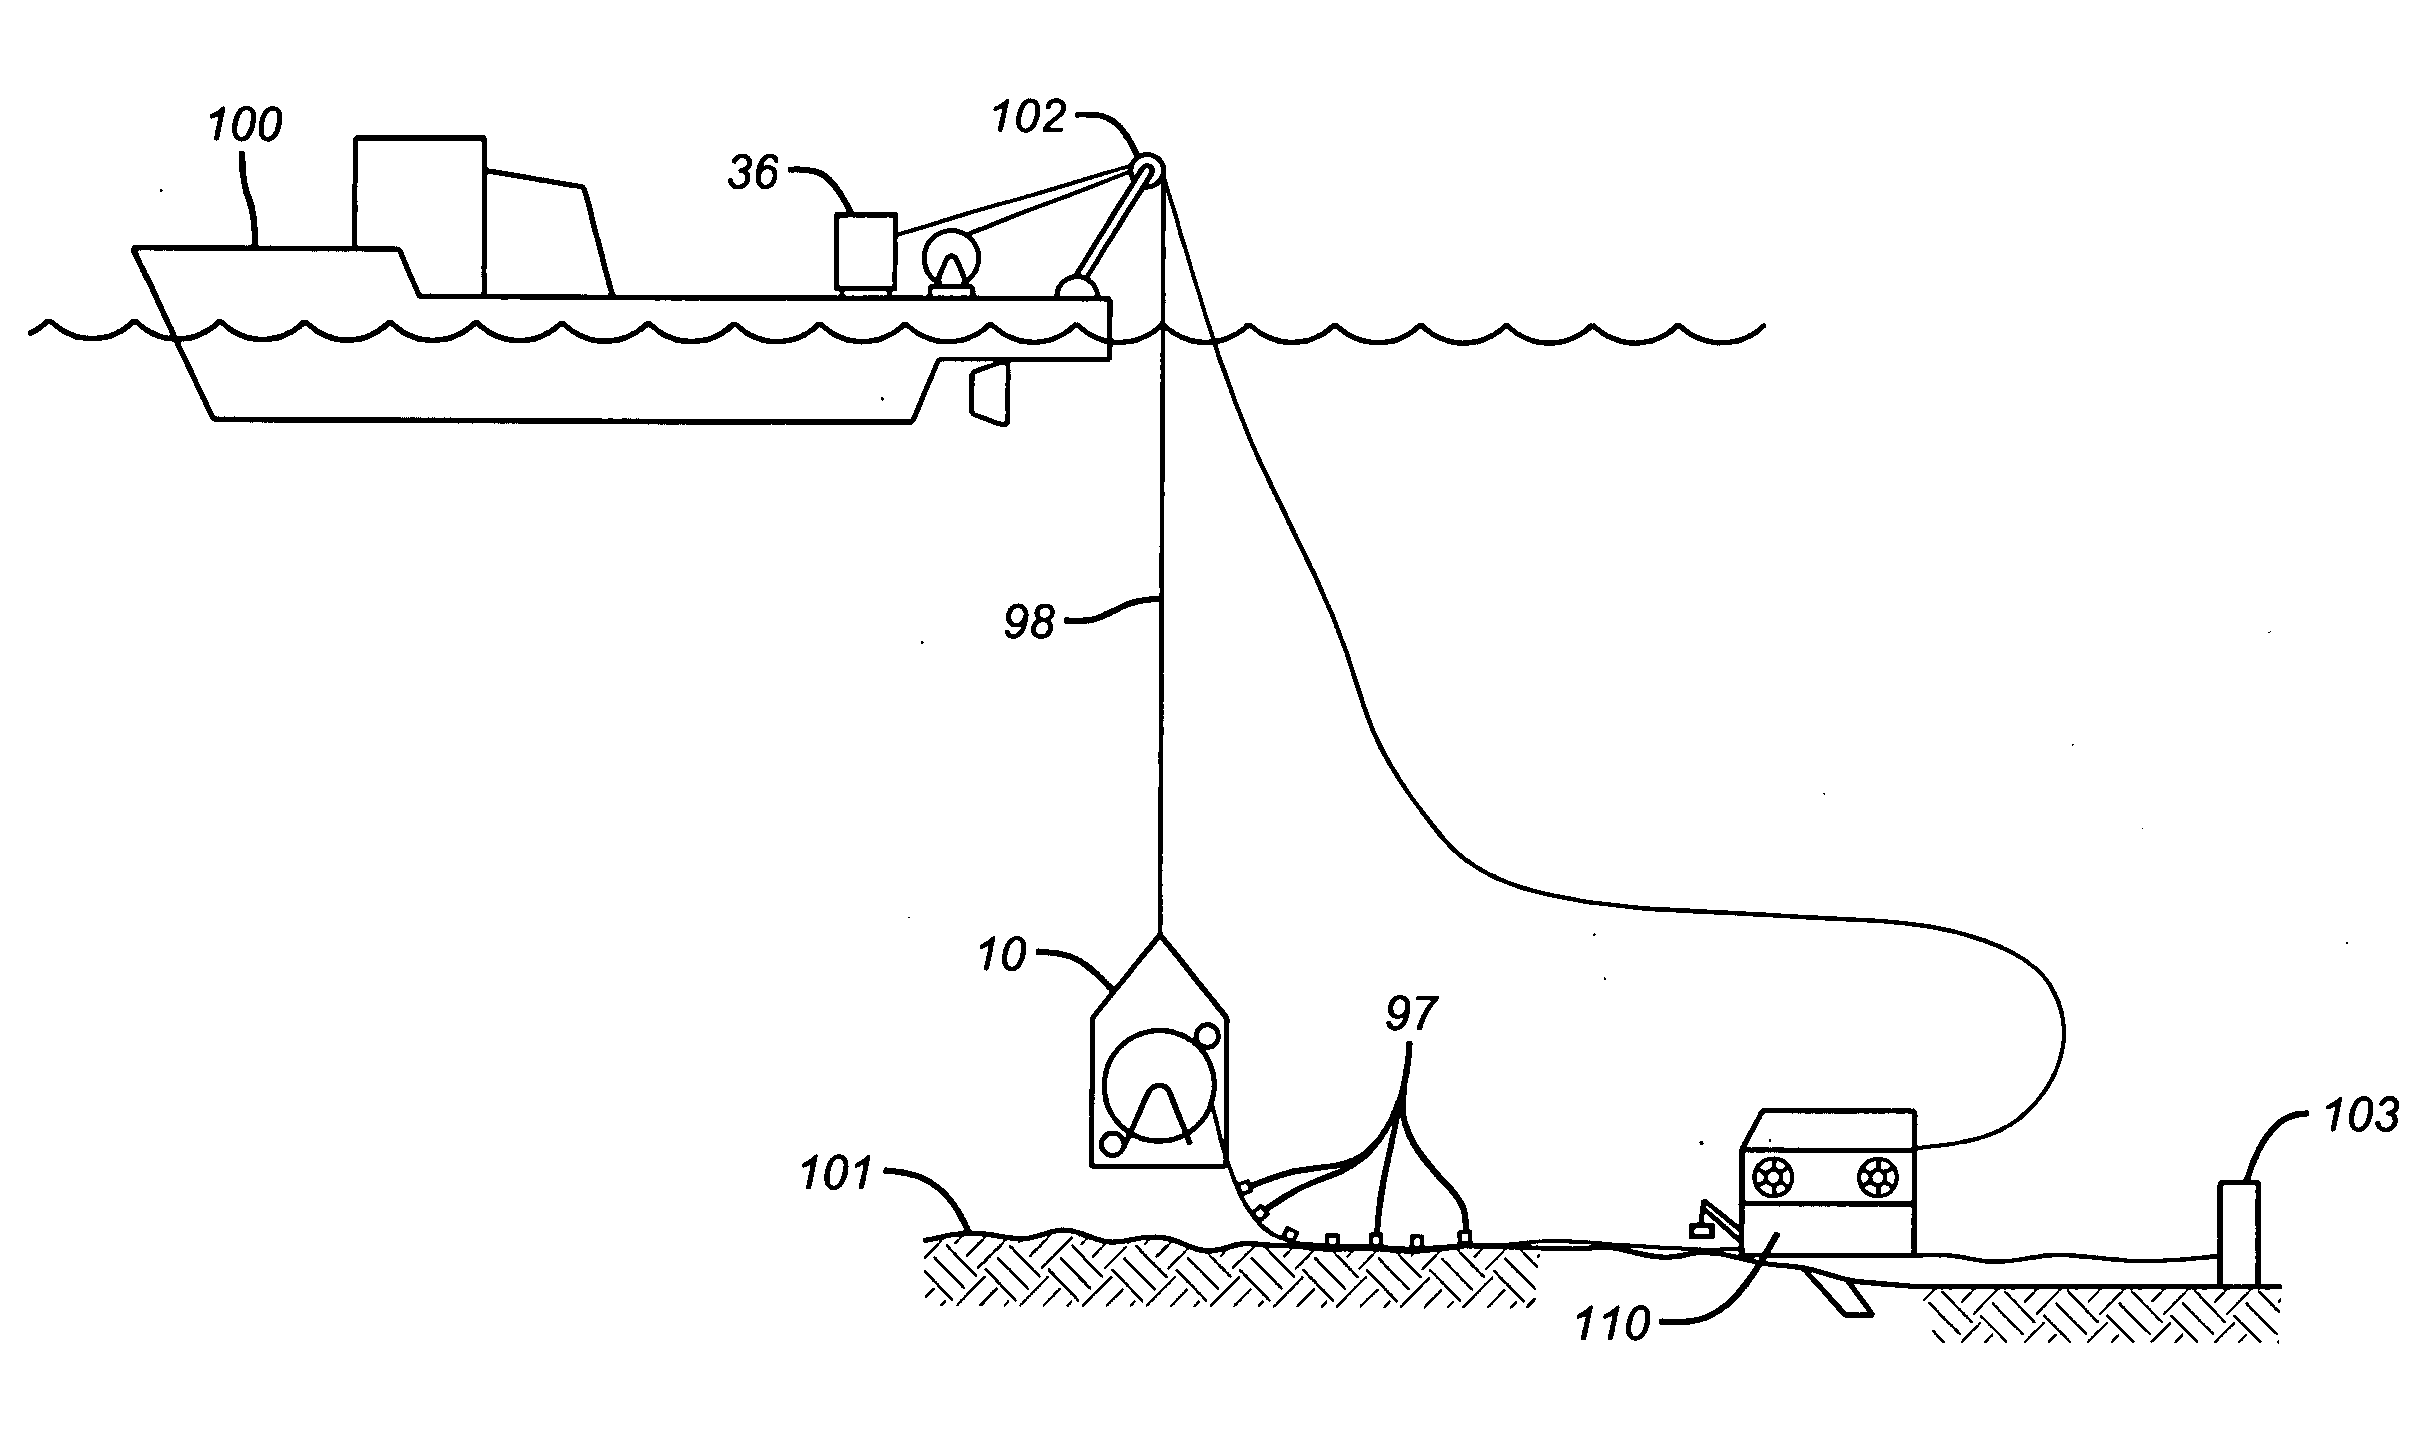 Remotely operated deployment system and method of use